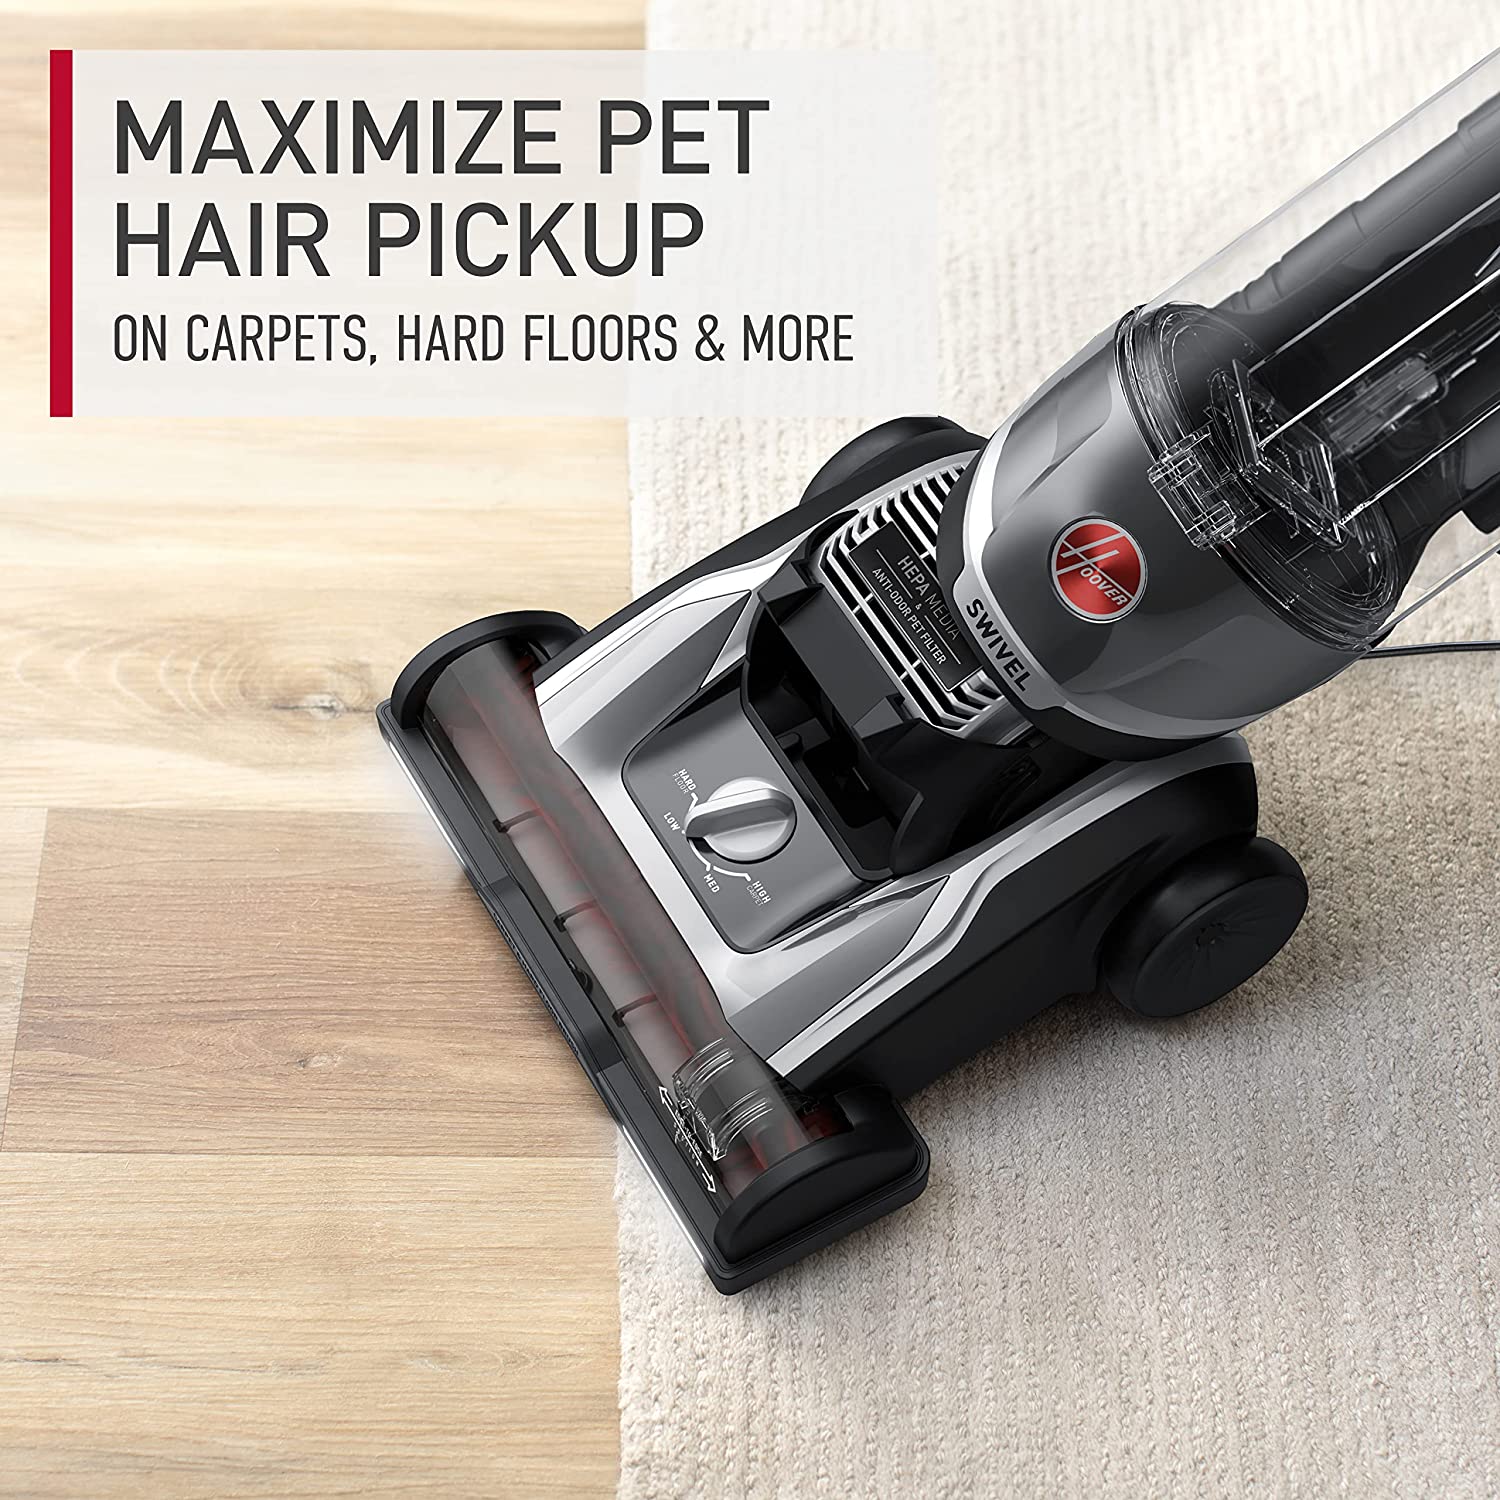 Hoover R-UH75200 MAXLife Elite Swivel XL Pet Vacuum Cleaner with HEPA Filtration, Bagless for Carpets and Hard Floors, Grey - Certified Refurbished